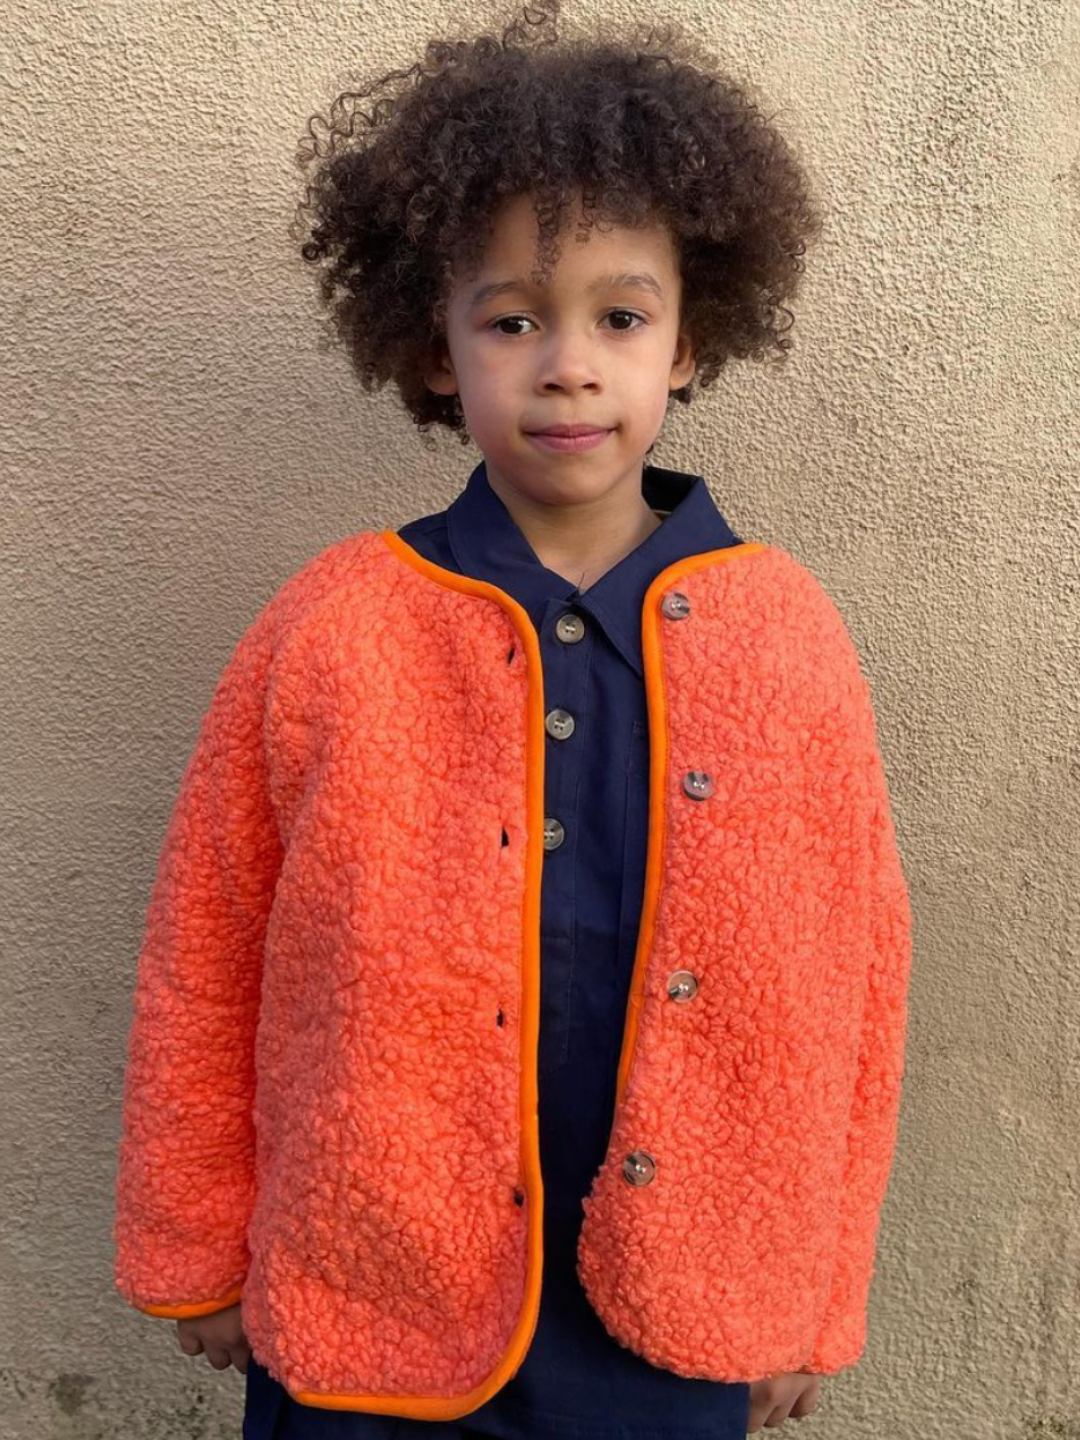 A child wearing a kids orange collarless fleece jacket with four brown buttons, worn over a navy blue shirt and pants, standing in front of a beige wall.